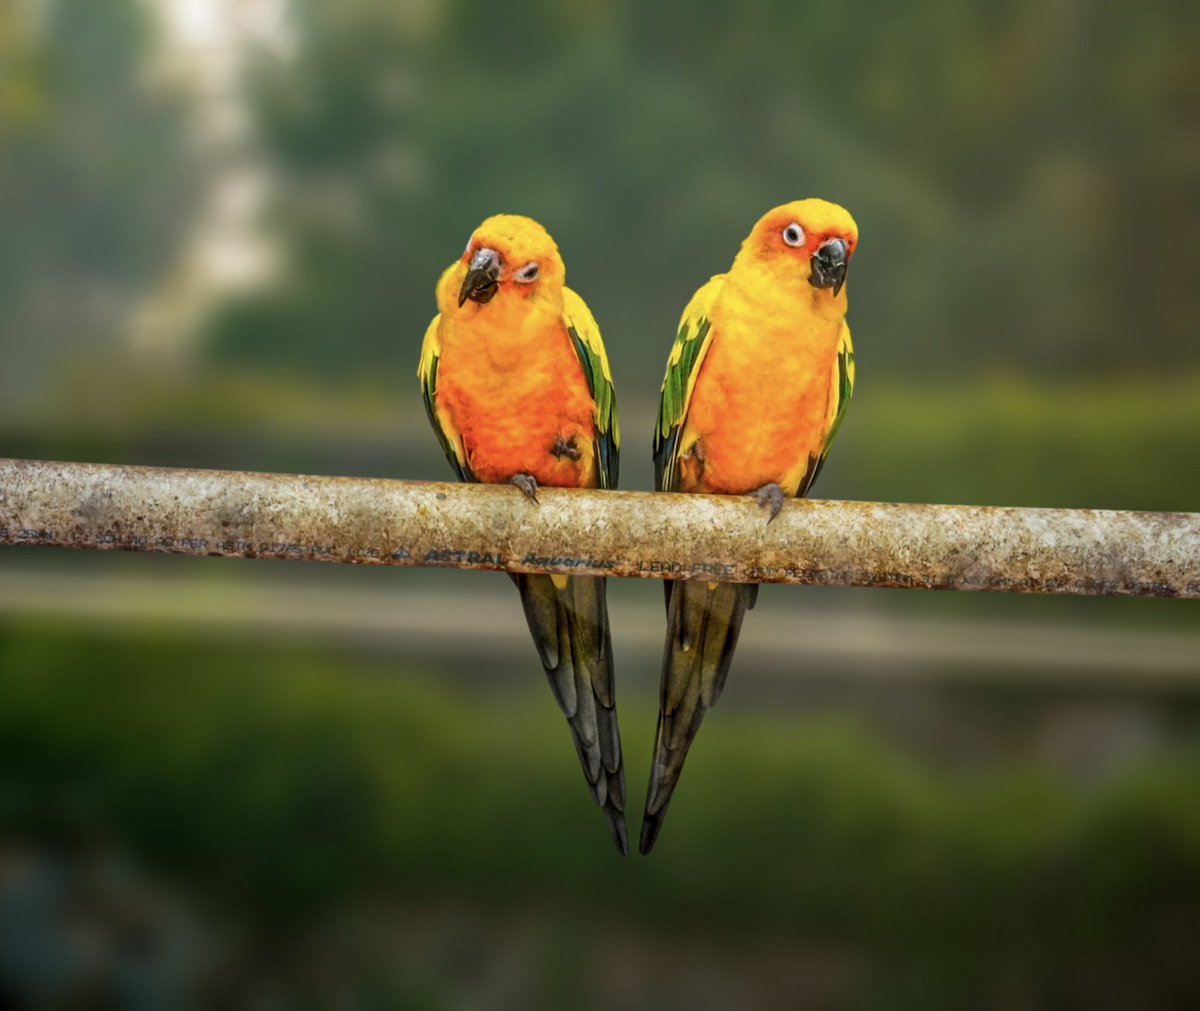 📸🦜Check out adorable photo of a couple of #sunconures #birds 
.
.
.
.
.
.
#photography #wildlifephotography #pictureoftheday